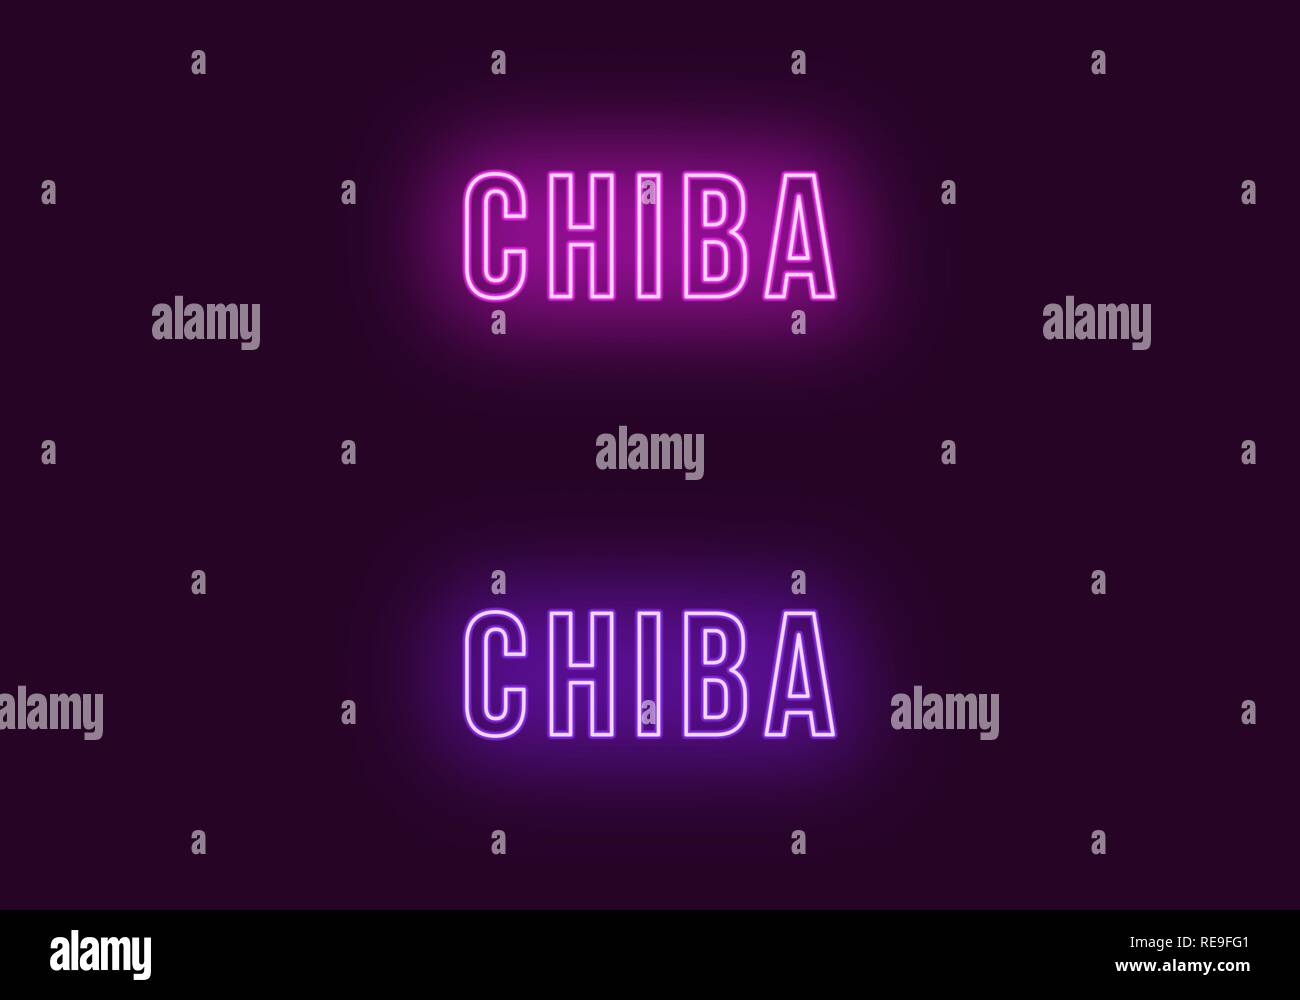 Neon name of Chiba city in Japan. Vector text of Chiba, Neon inscription with backlight in Bold style, purple and violet colors. Isolated glowing titl Stock Vector